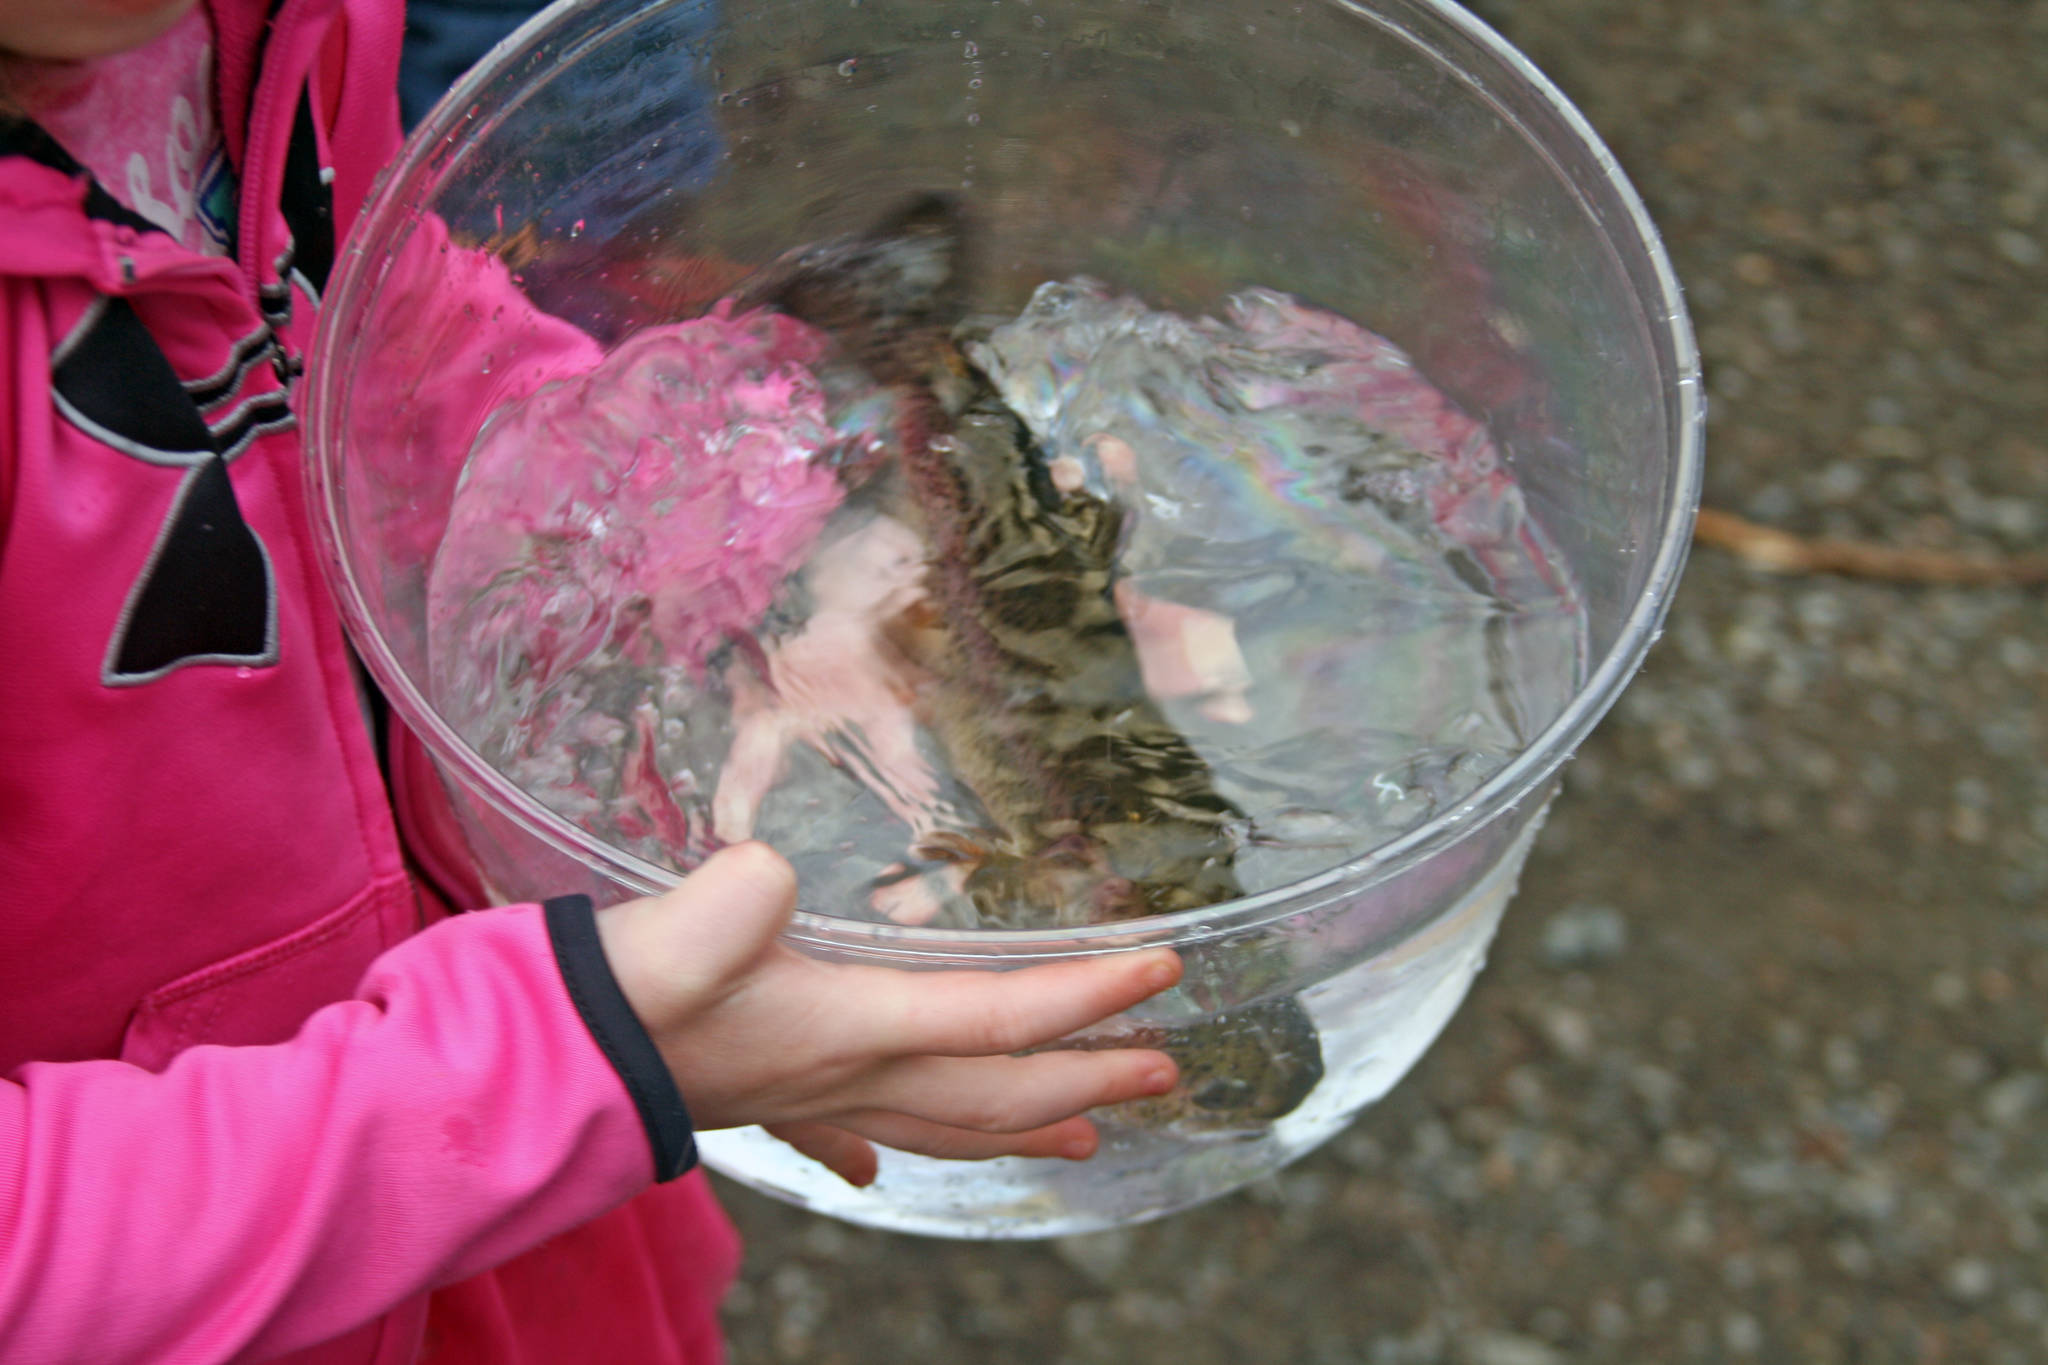 A student carries a rainbow trout at Johnson Lake State Recreation Site in Kasilof. Approximately 950 borough students released 5,000 fish into Johnson Lake as part of an Alaska Department of Fish and Game restocking effort. (Photo by Erin Thompson/Peninsula Clarion)